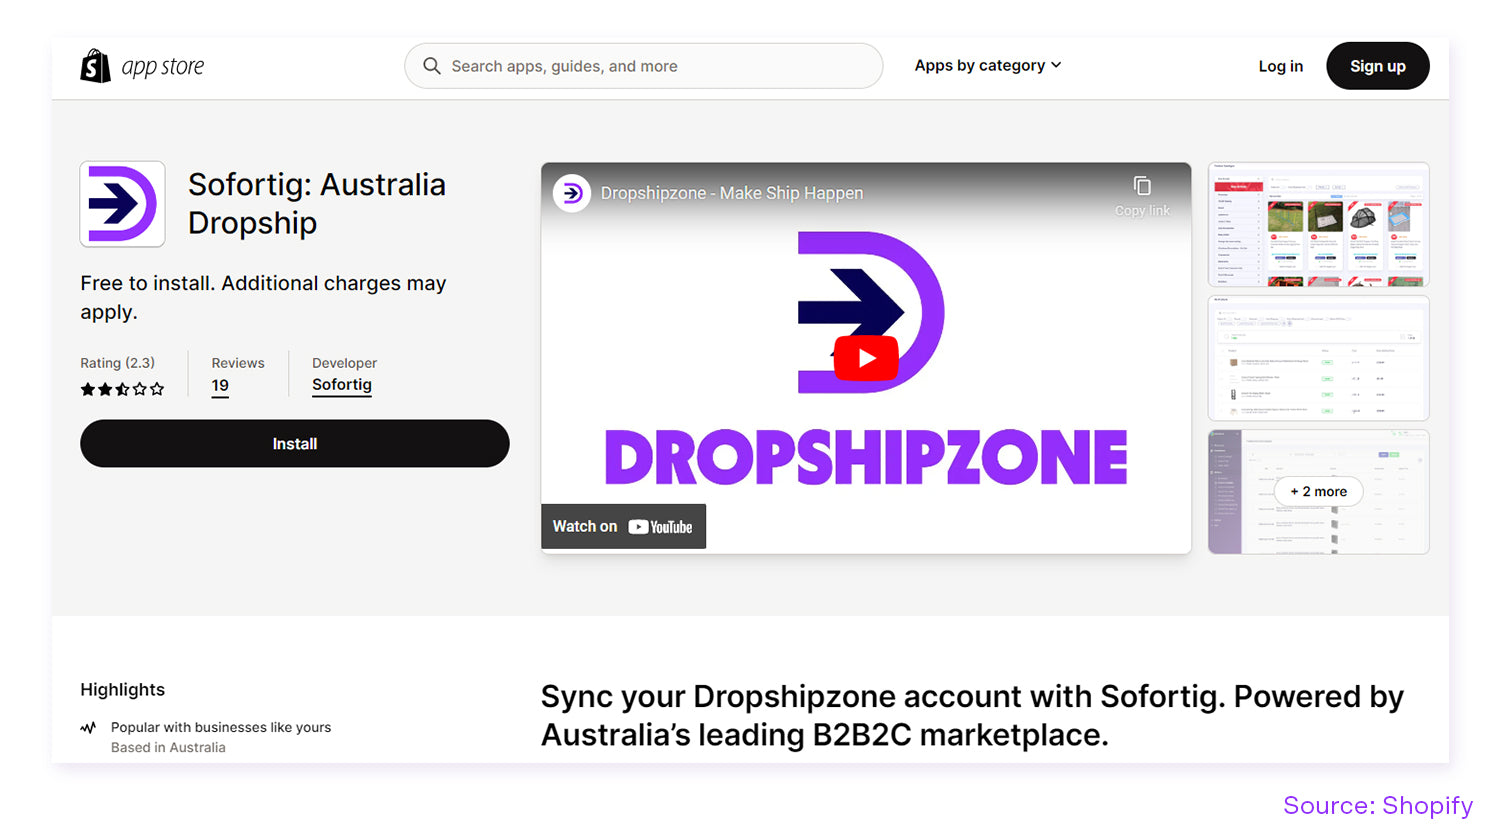 Discover Sofortig by Dropshipzone on the Shopify app store.